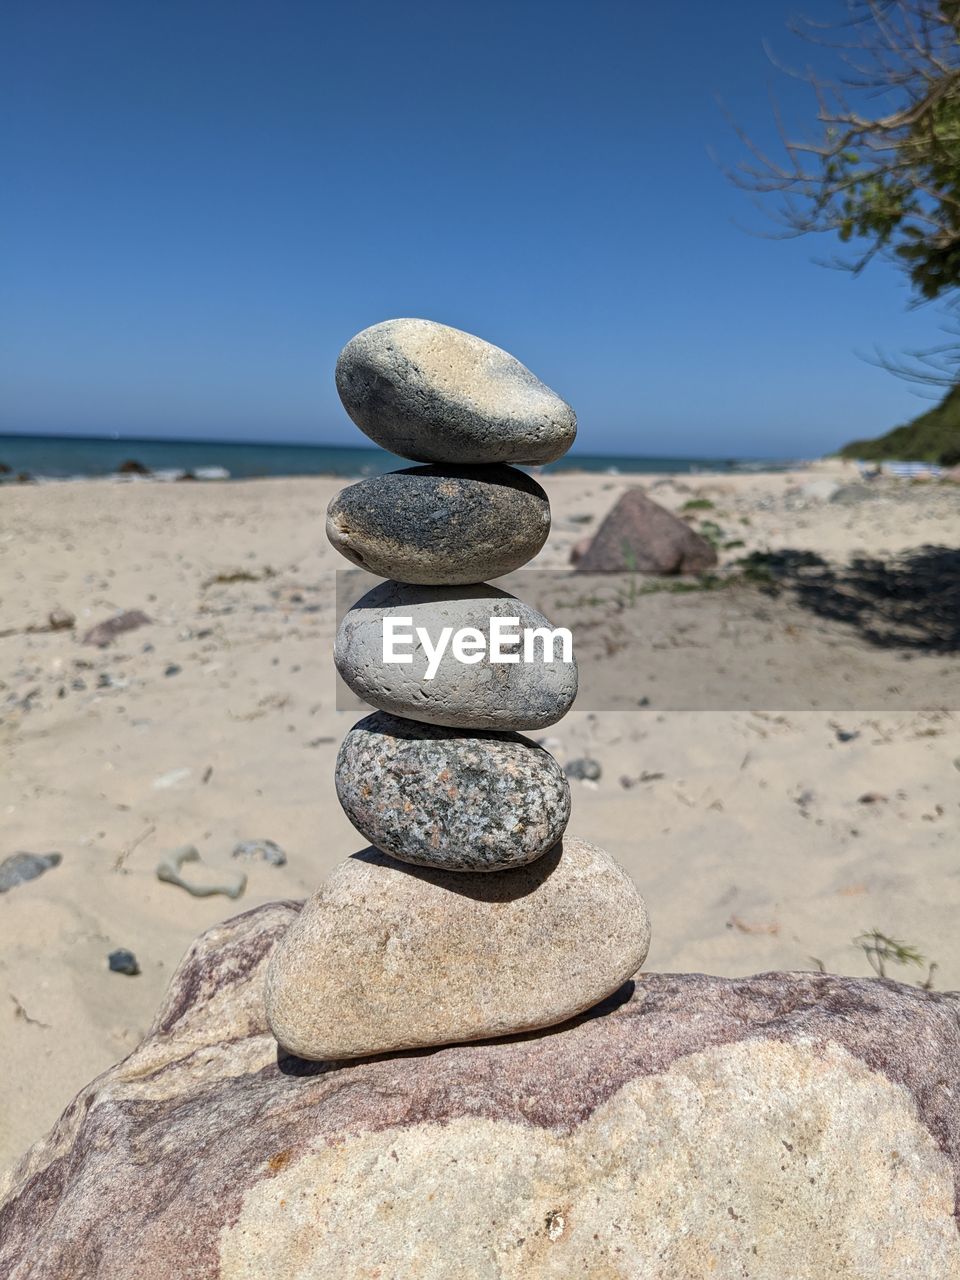 rock, balance, land, zen-like, beach, sand, sky, nature, stone, pebble, tranquility, shore, sea, water, tranquil scene, clear sky, coast, no people, scenics - nature, beauty in nature, day, blue, outdoors, sunlight, sunny, landscape, body of water, horizon, environment, stability, ocean